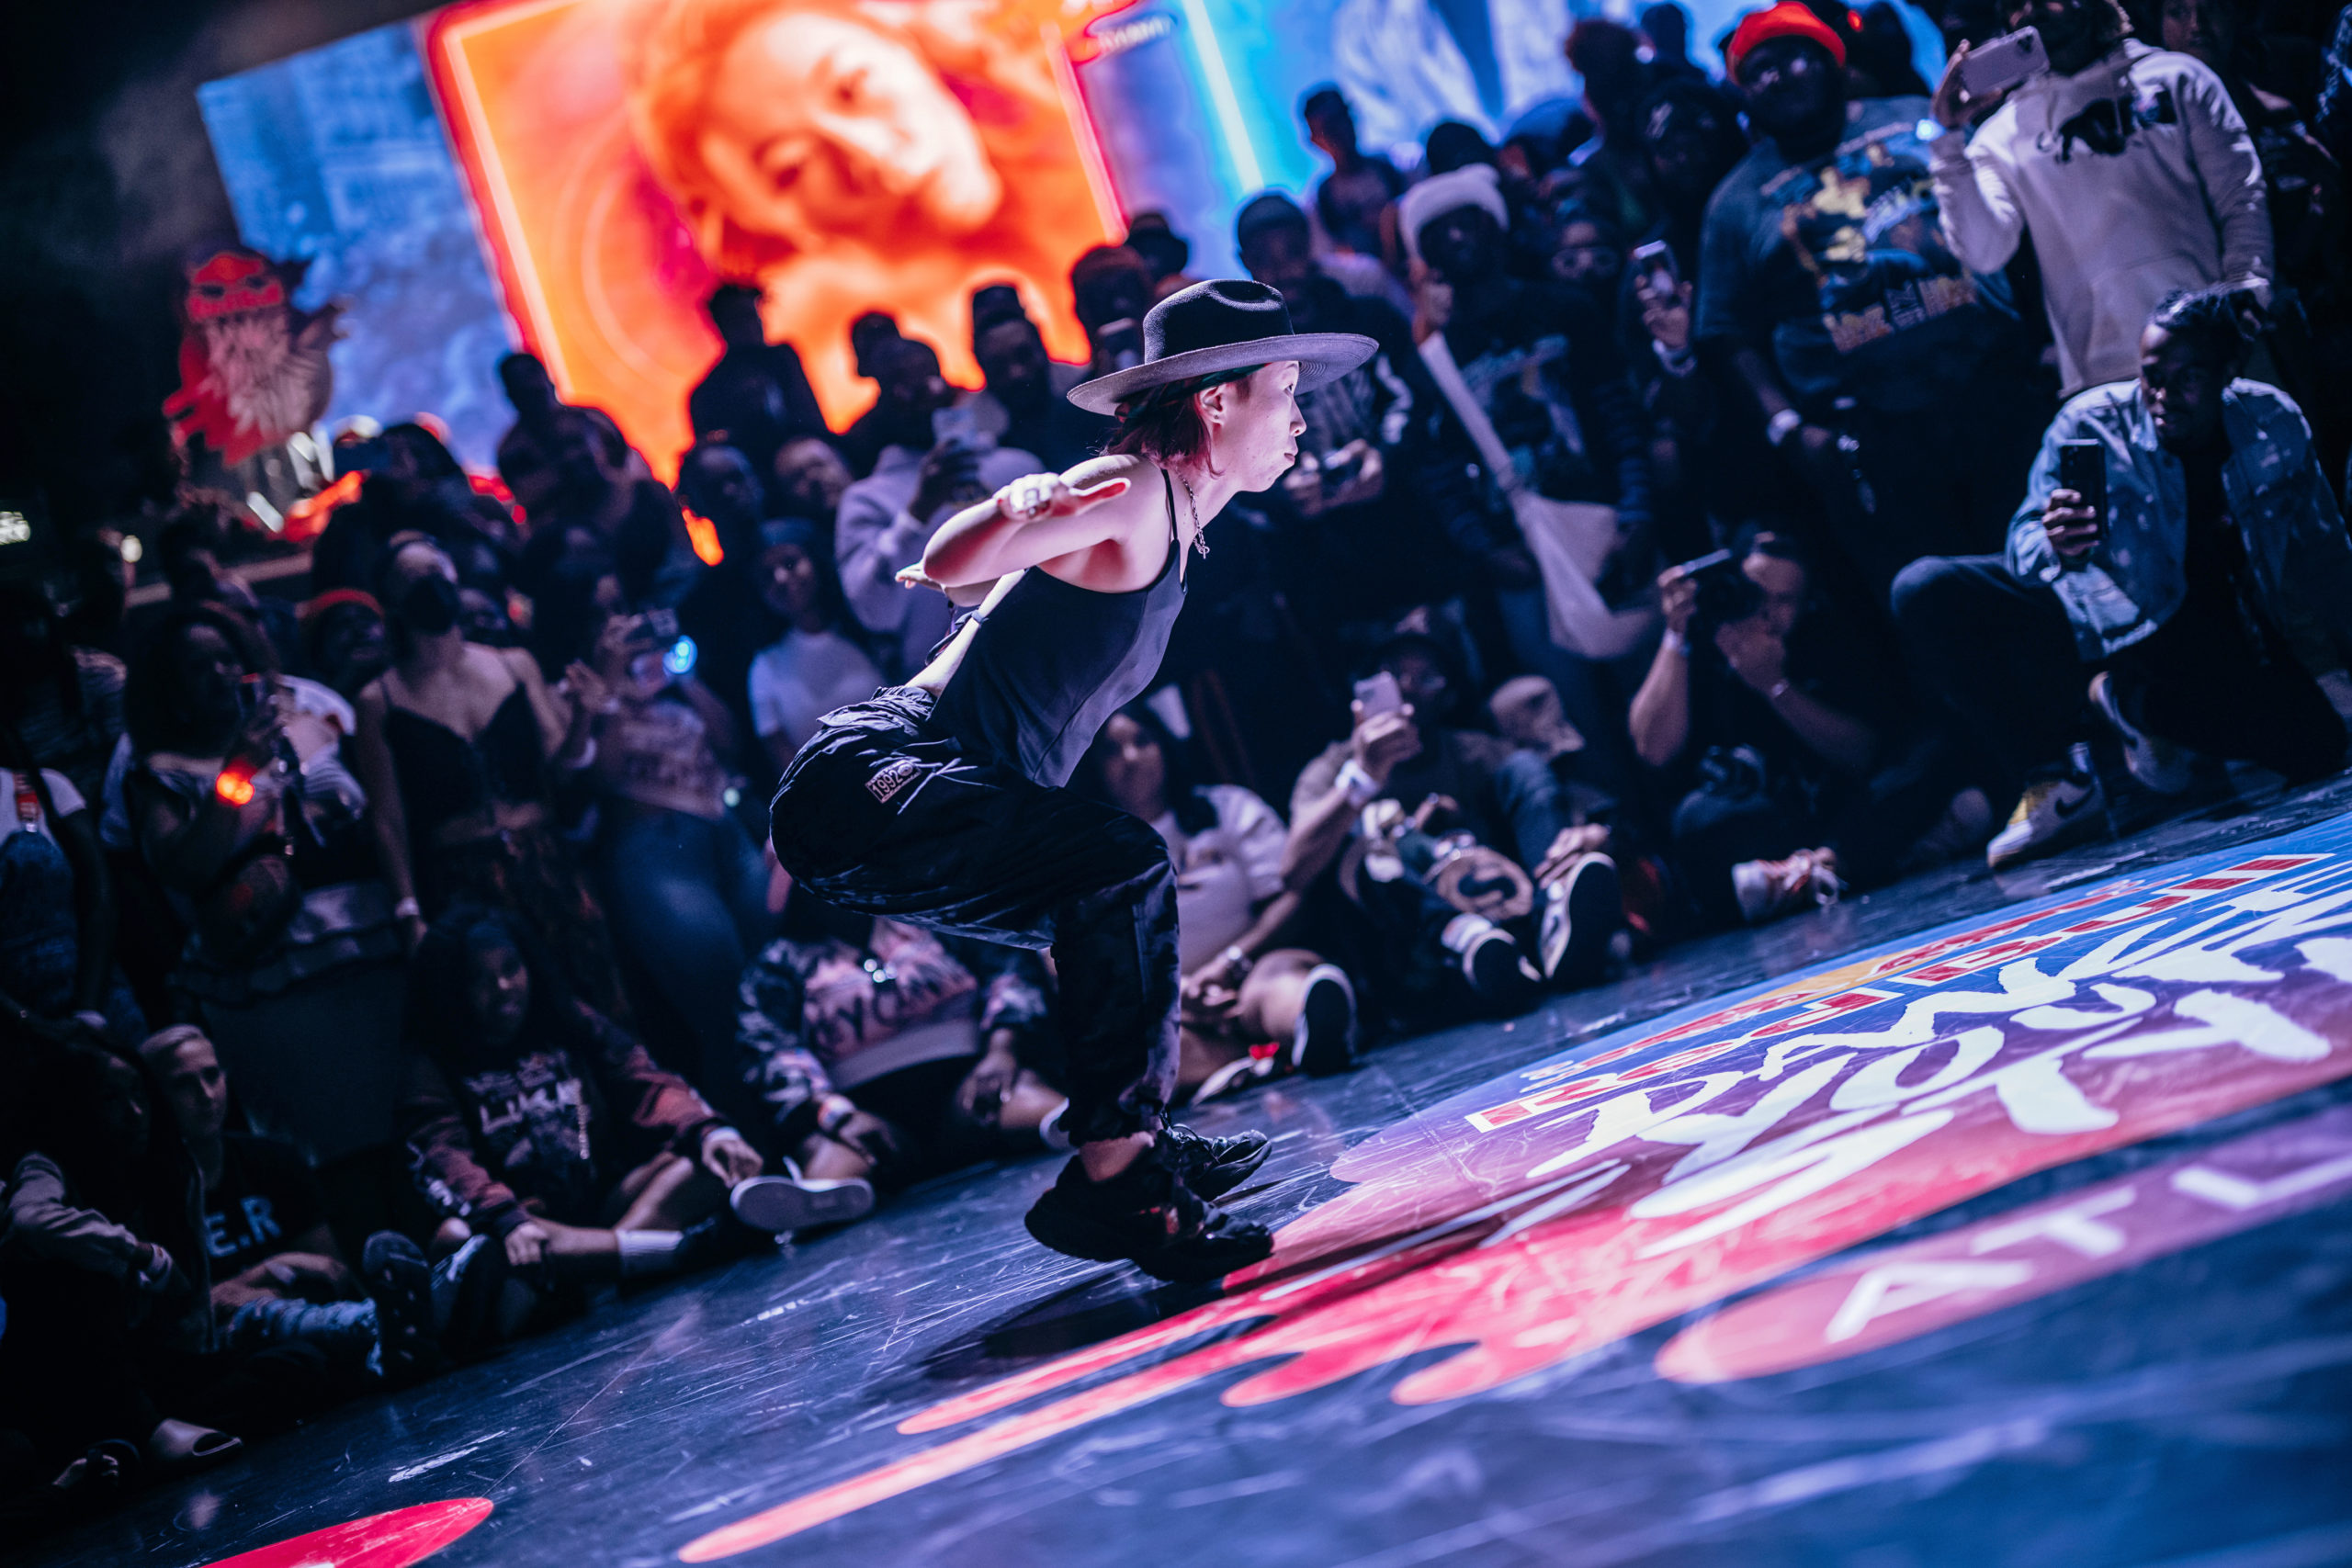 Sun Kim competes at the Red Bull Dance Your Style qualifier in Atlanta, GA, USA on May 13, 2022.